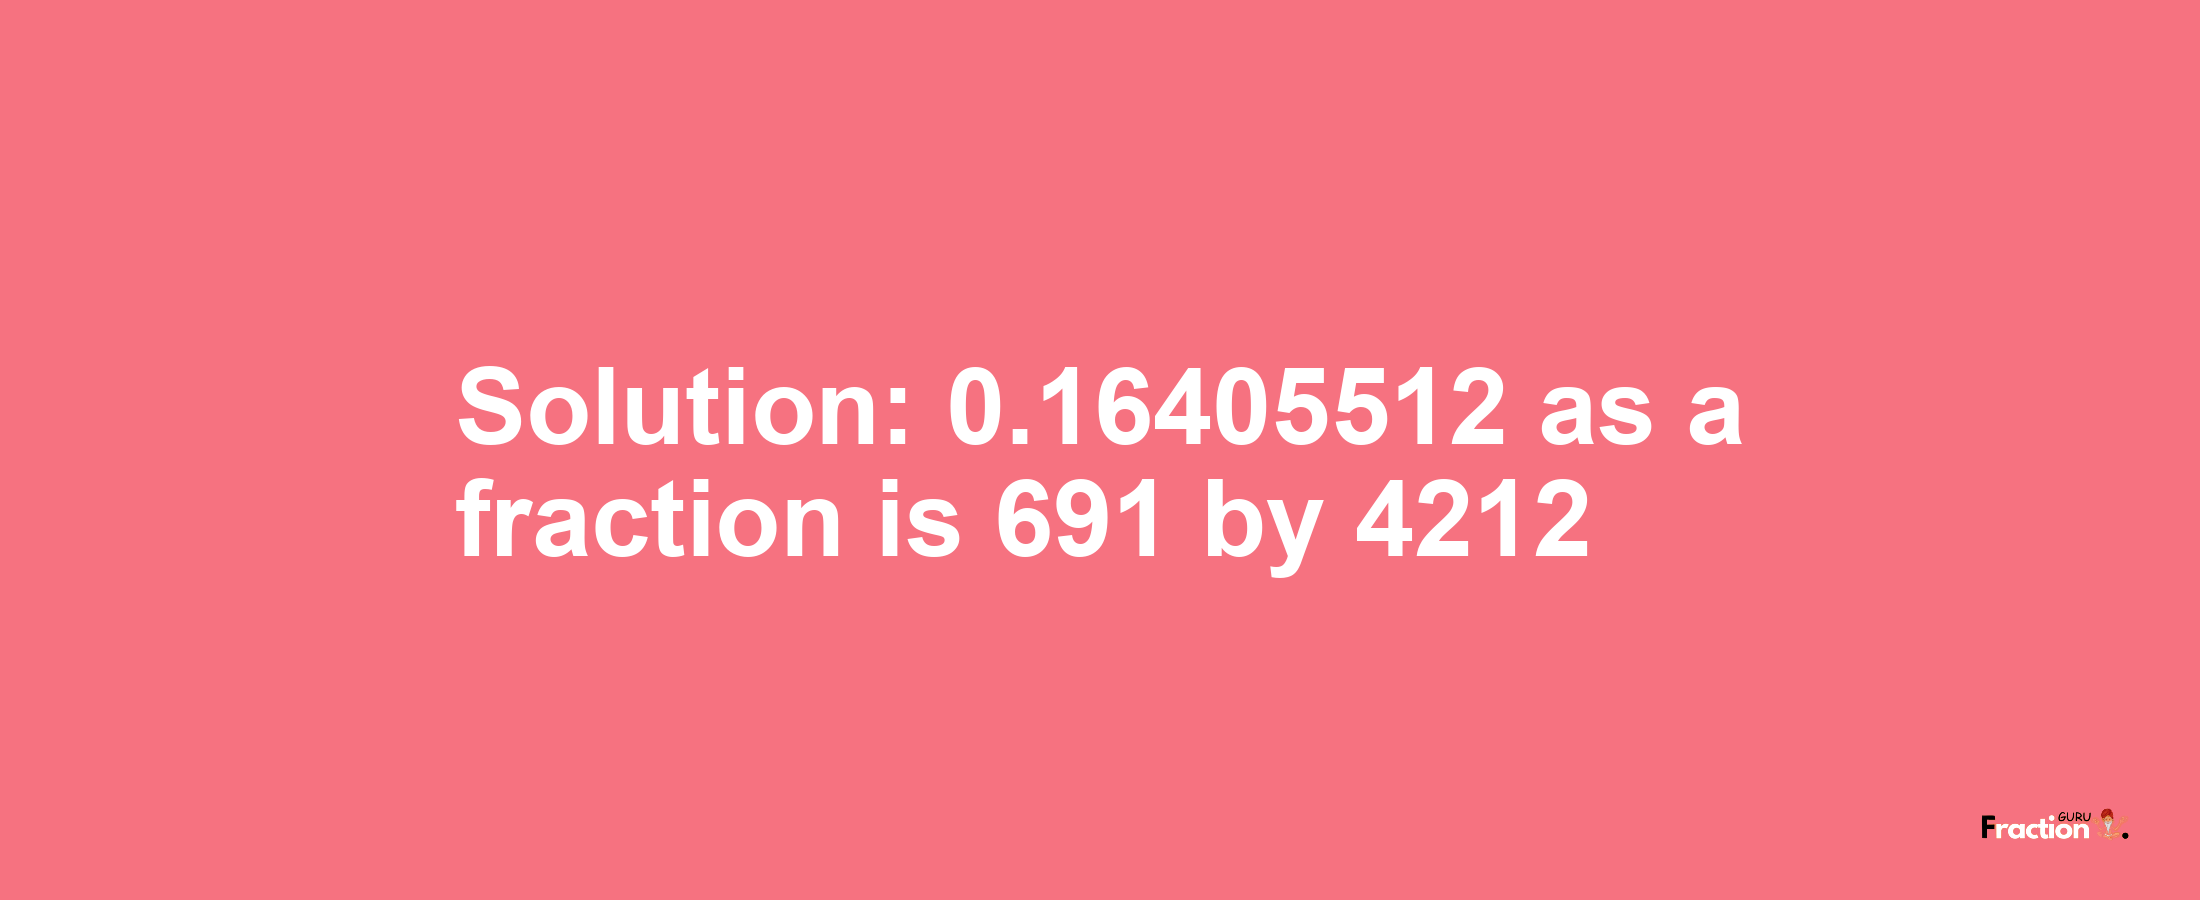 Solution:0.16405512 as a fraction is 691/4212